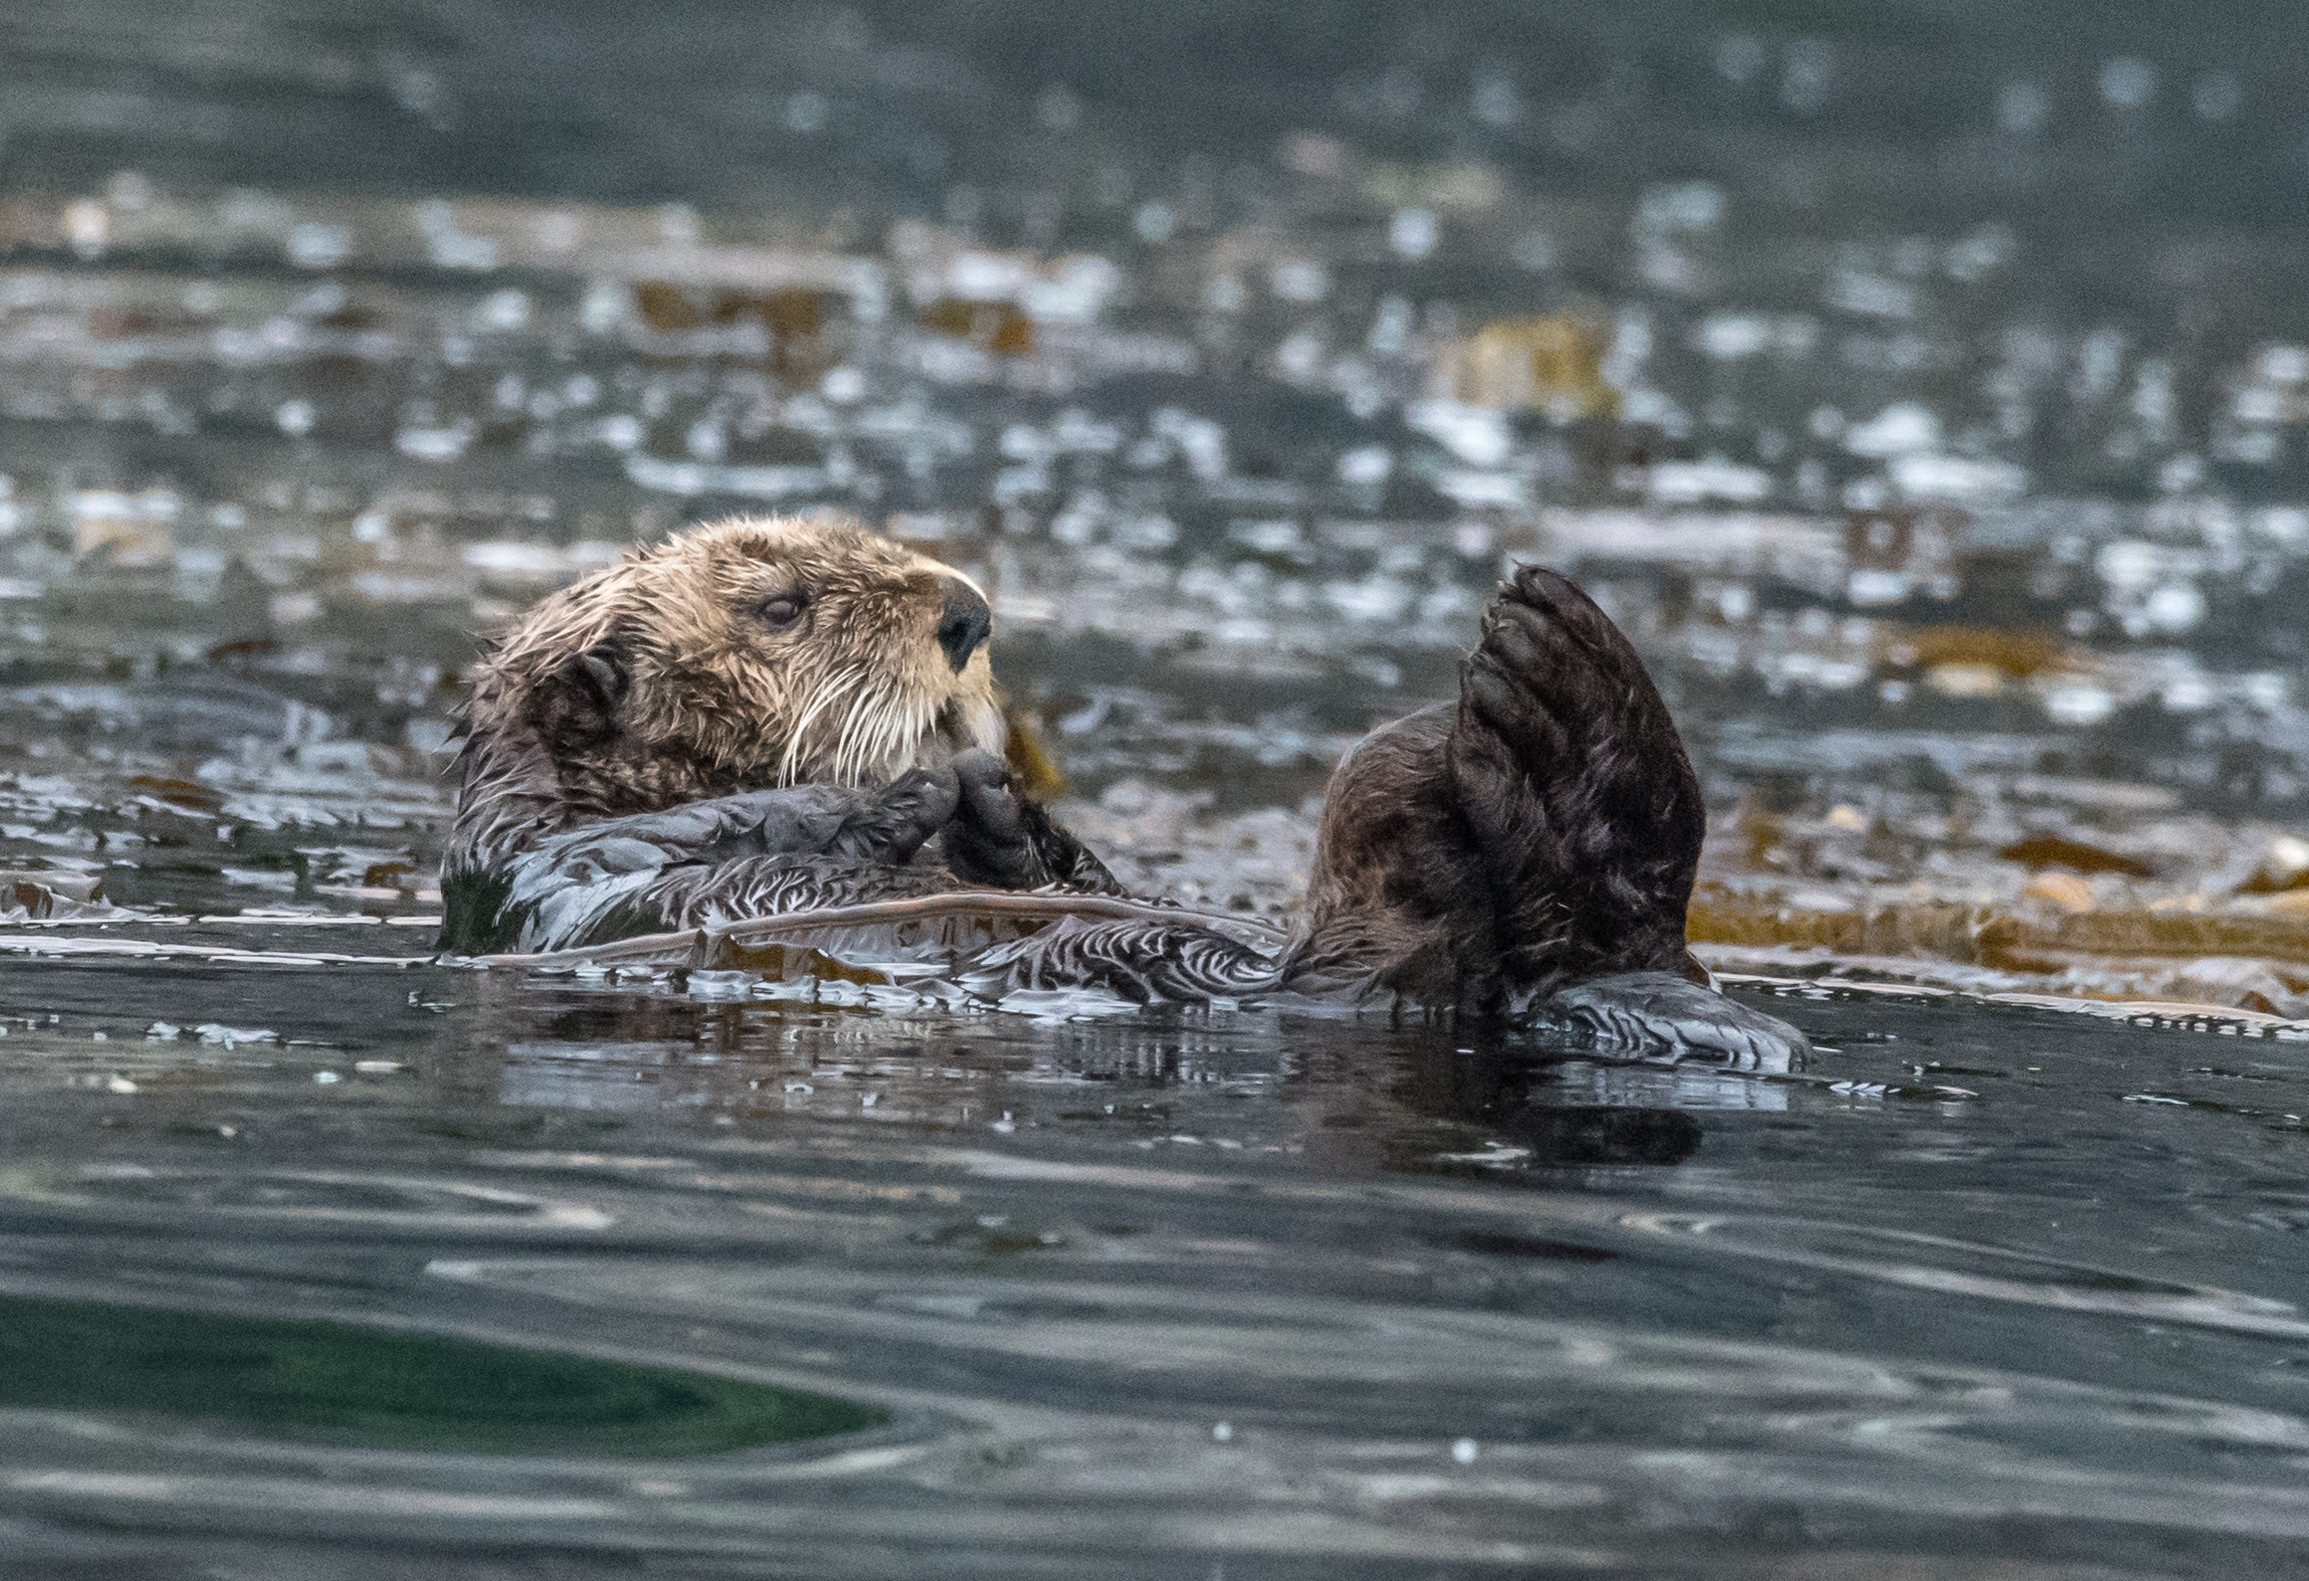 A sea otter floats in a bed of kelp in the water.